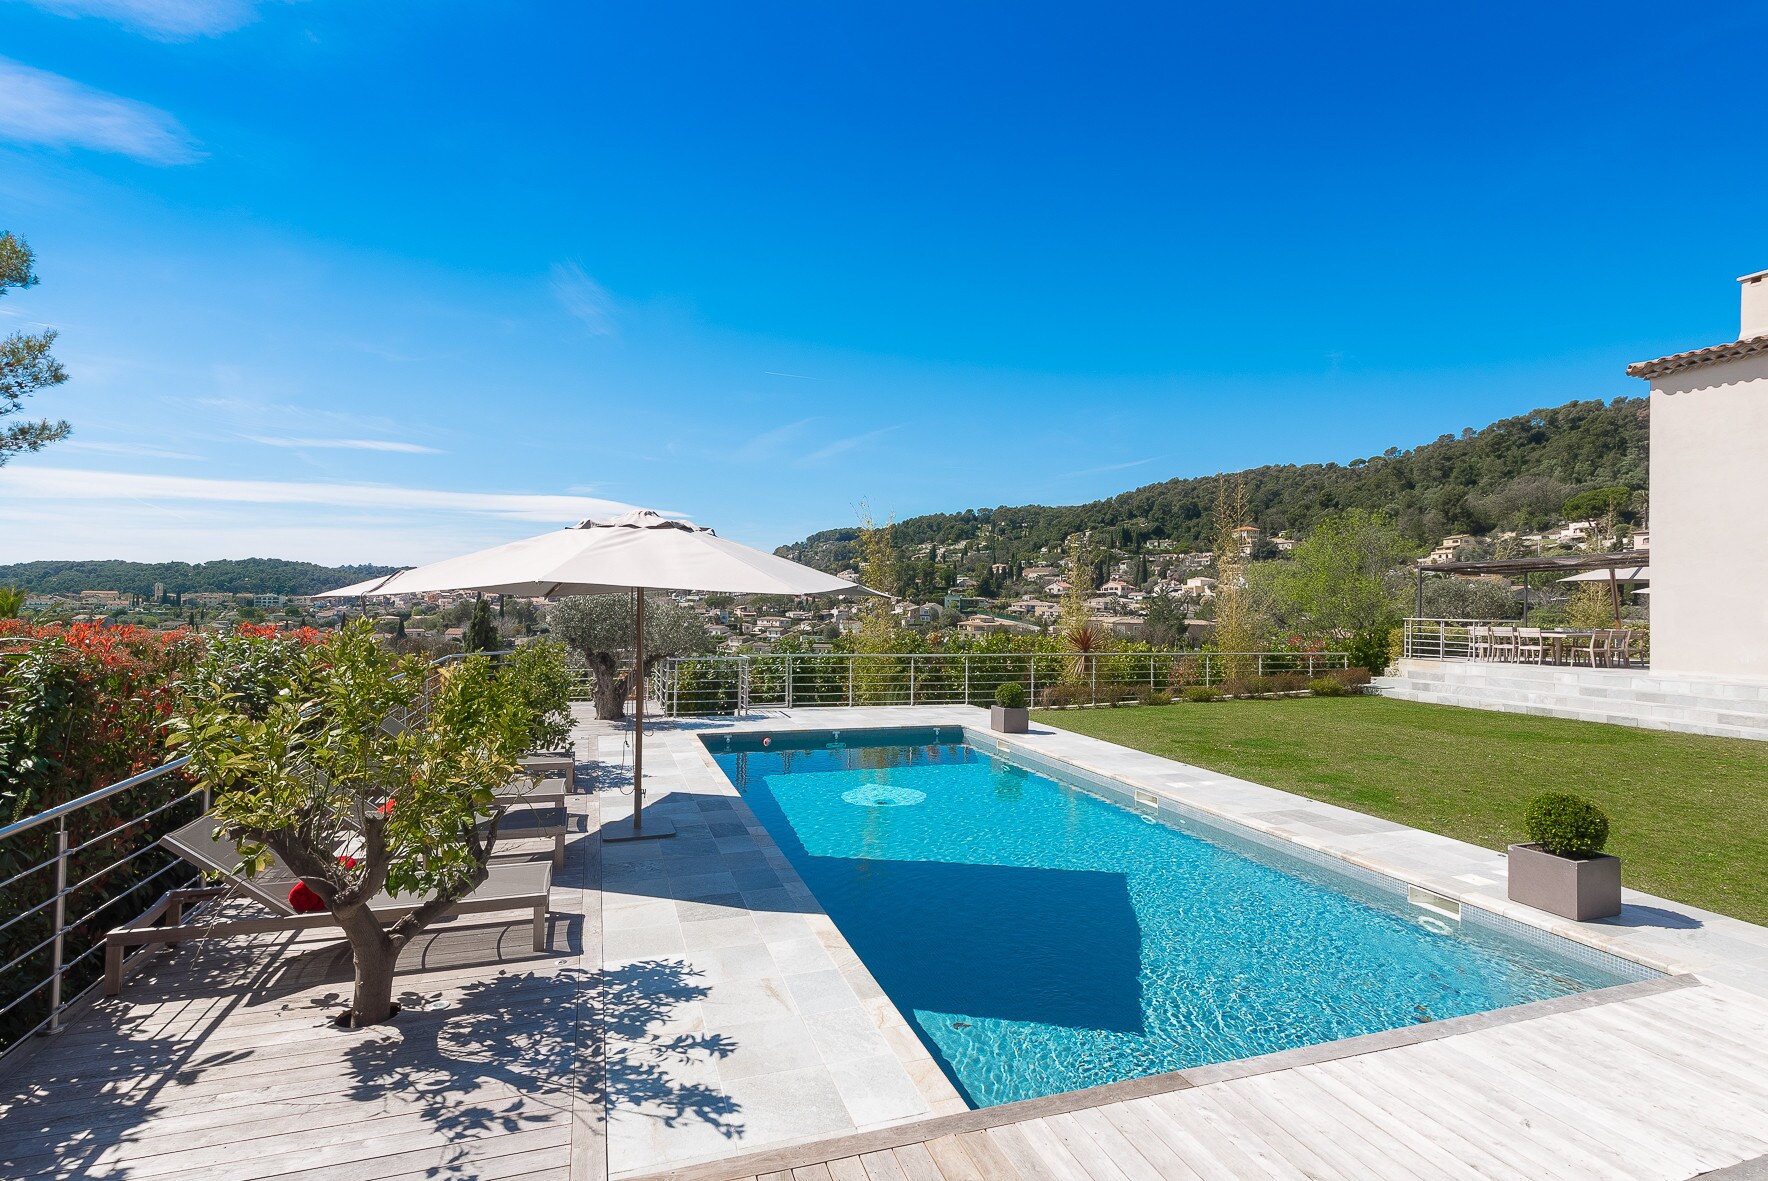 Property Image 2 - Stunning luxury villa overlooking the village with 6 bedrooms, jacuzzi, indoor and outdoor pools